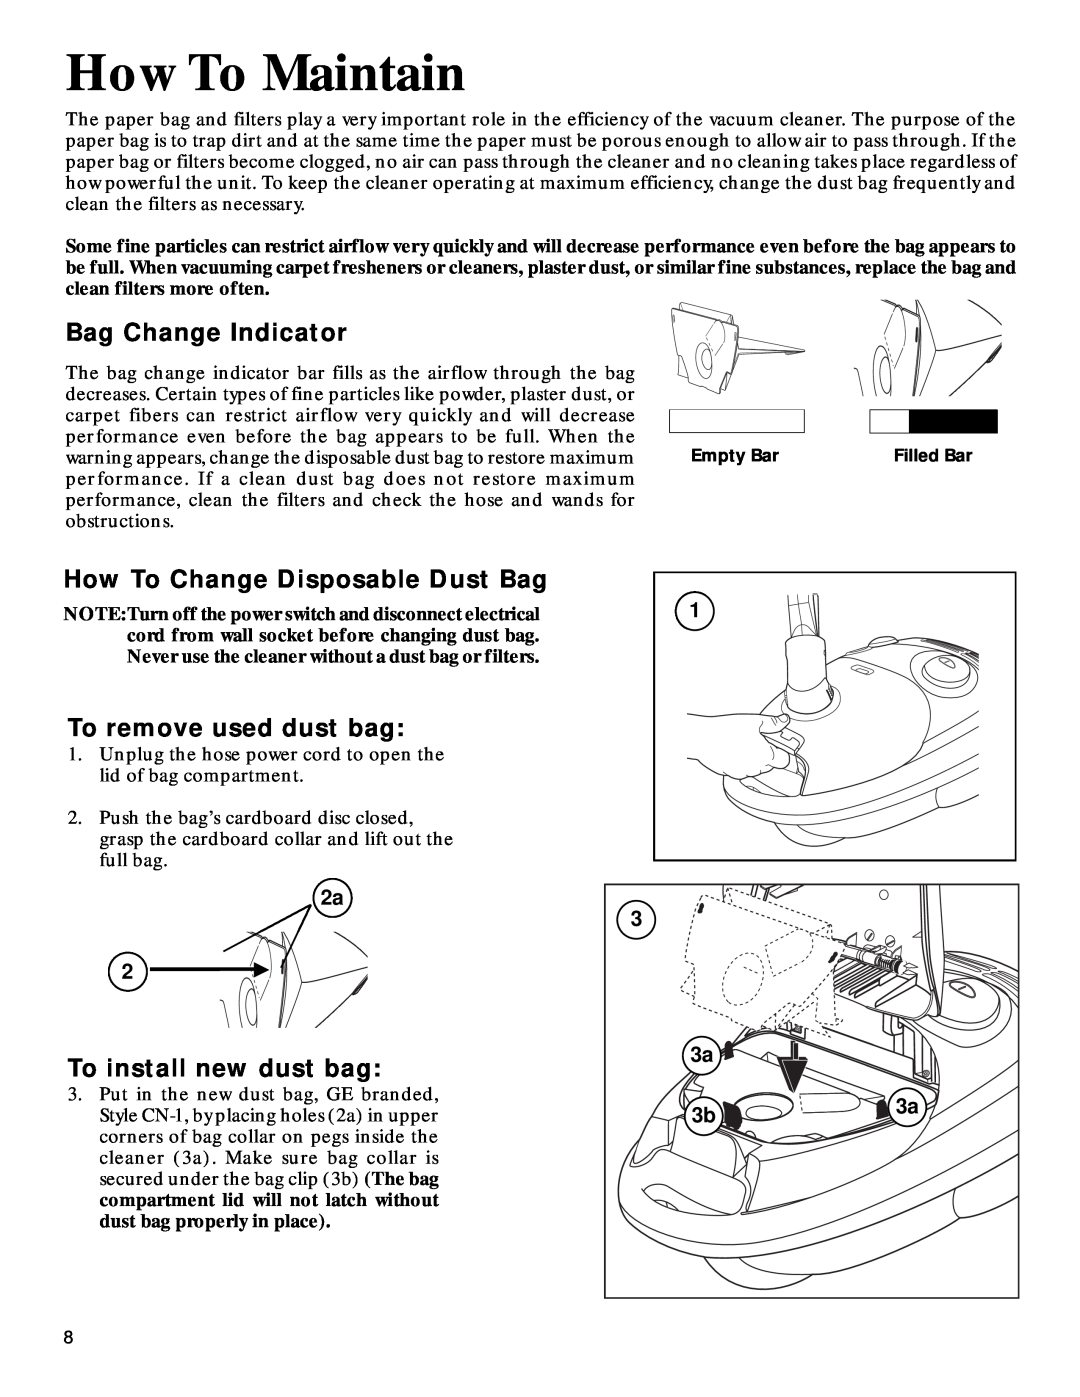 GE 106766, 71937 How To Maintain, Bag Change Indicator, How To Change Disposable Dust Bag, To remove used dust bag, 2a 